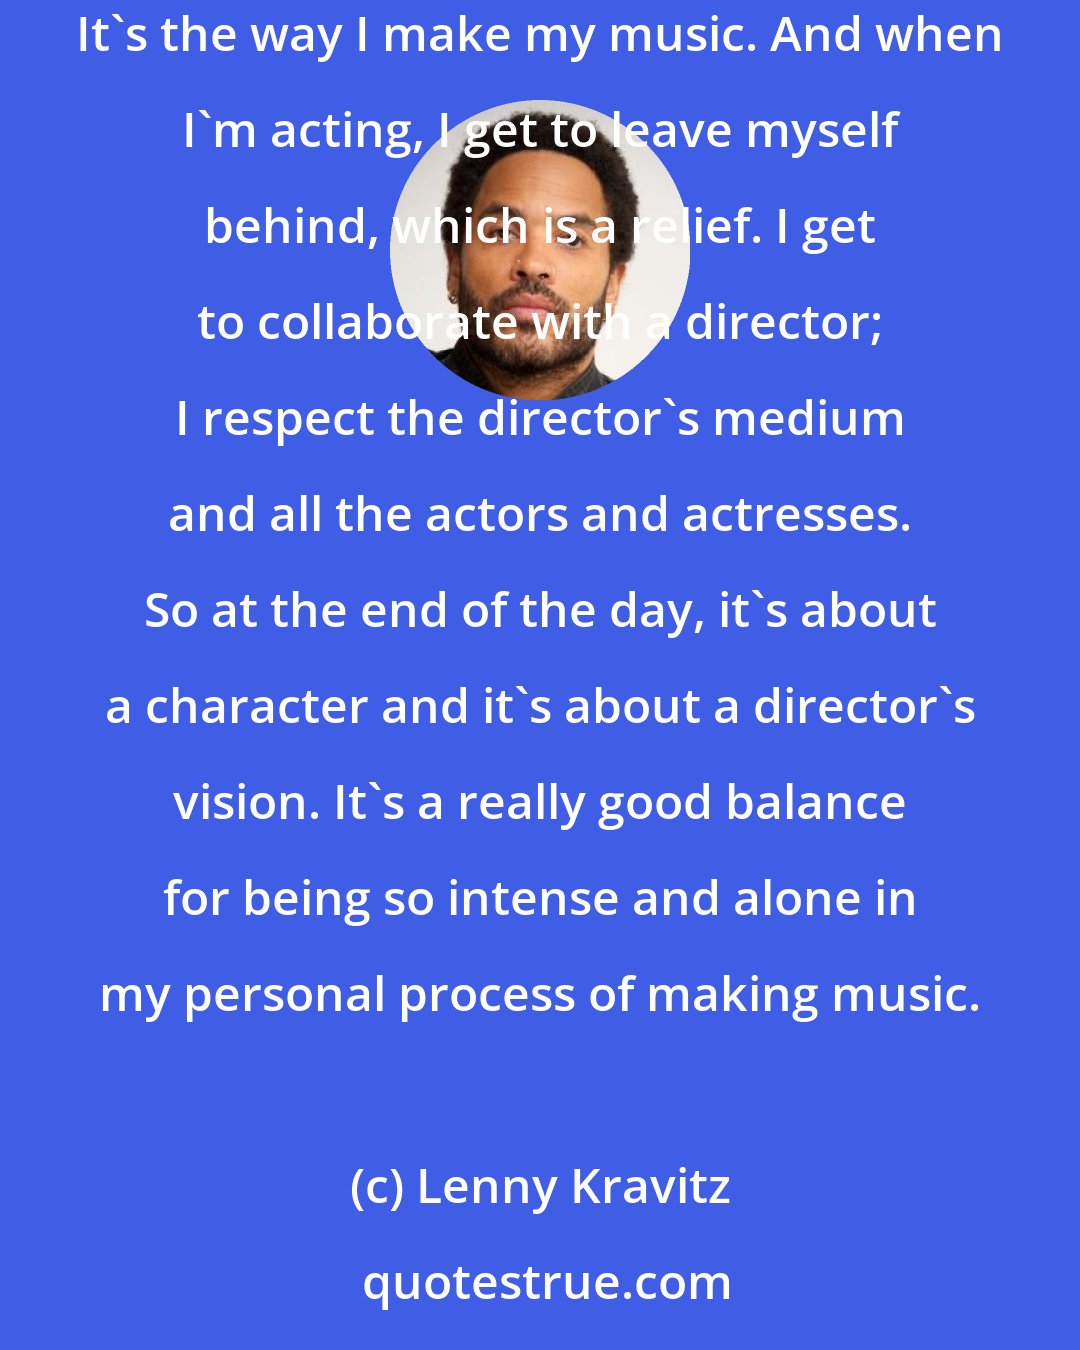 Lenny Kravitz: When I'm in the studio, I write the music, I play the different instruments, I produce it, I arrange it, and it's a self-indulgent exercise. It's the way I make my music. And when I'm acting, I get to leave myself behind, which is a relief. I get to collaborate with a director; I respect the director's medium and all the actors and actresses. So at the end of the day, it's about a character and it's about a director's vision. It's a really good balance for being so intense and alone in my personal process of making music.